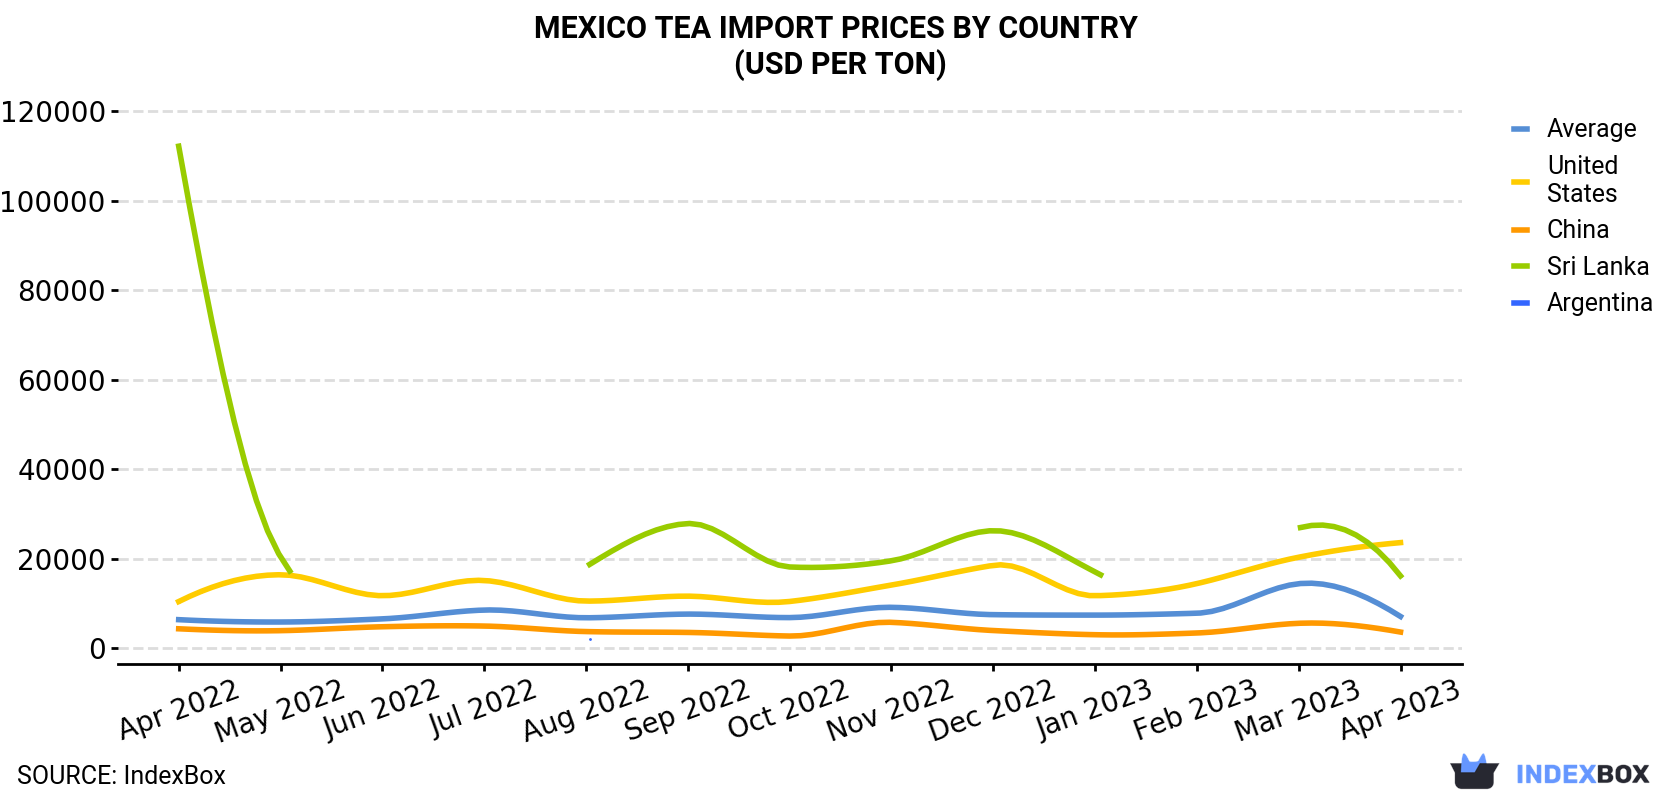 Mexico Tea Import Prices By Country (USD Per Ton)